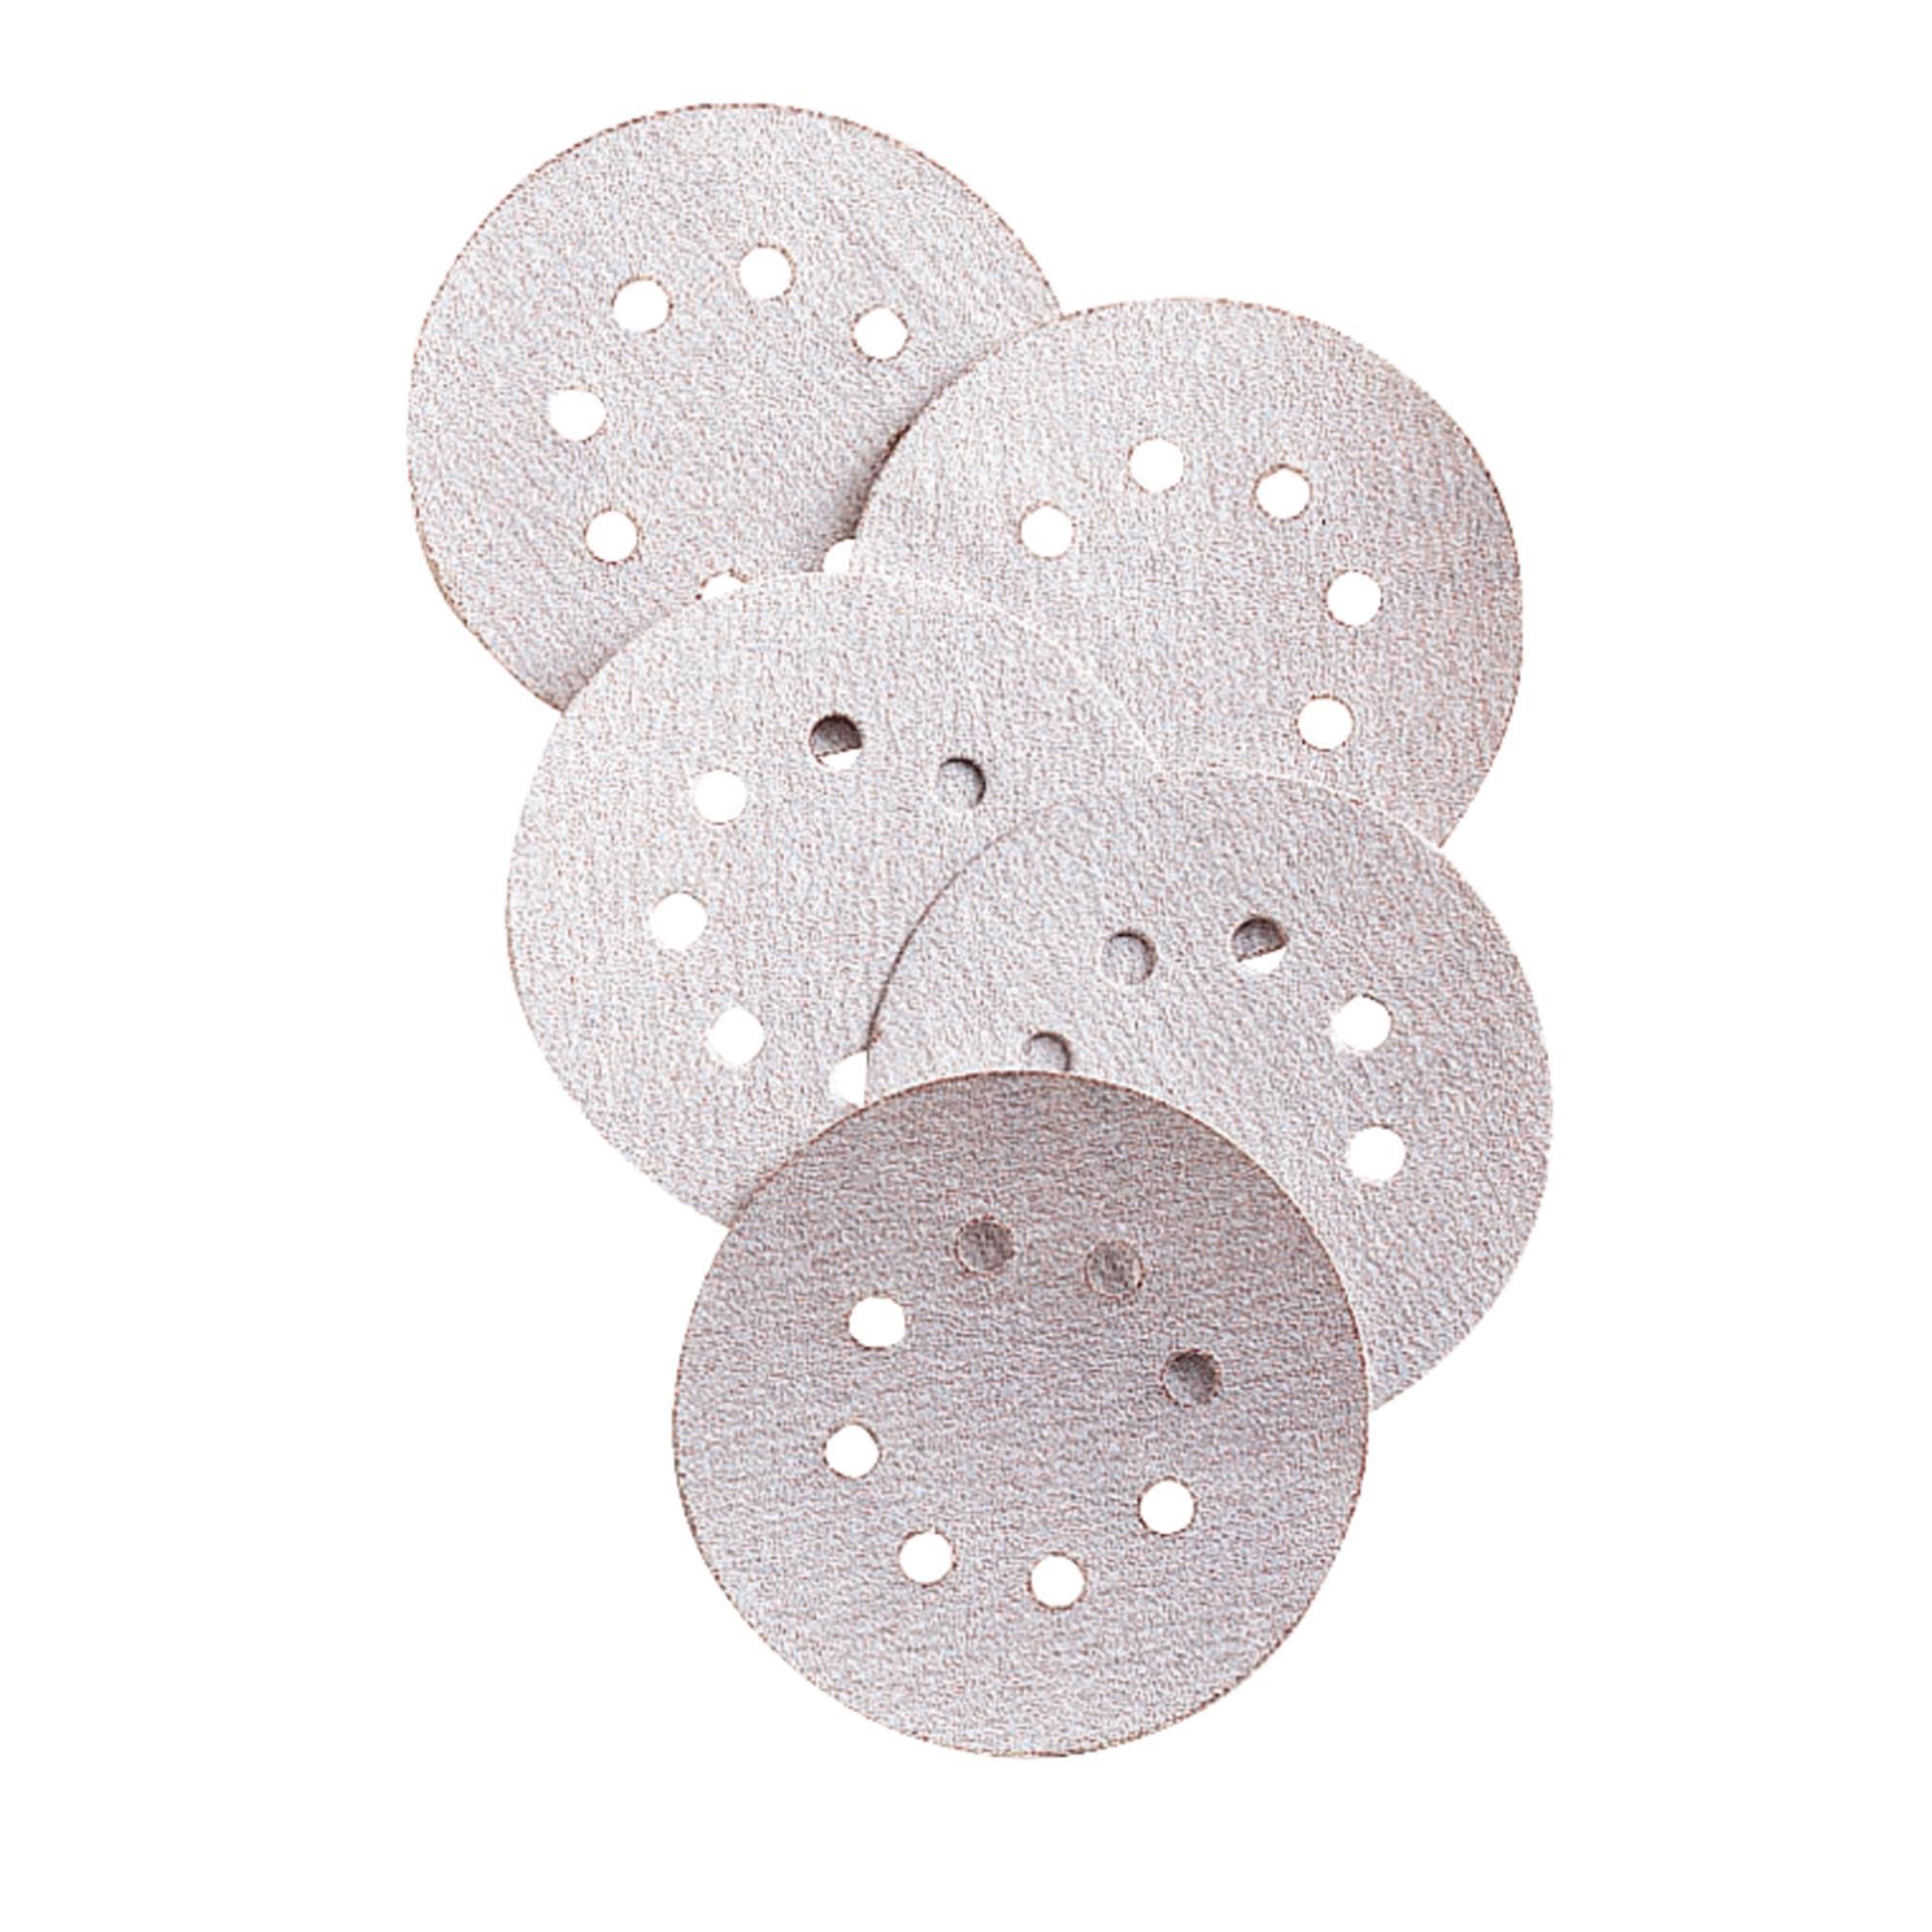 Do It Best 8-Hole Hook and Loop Vented Sanding Disc - 80 Grit, 5pk, 5"